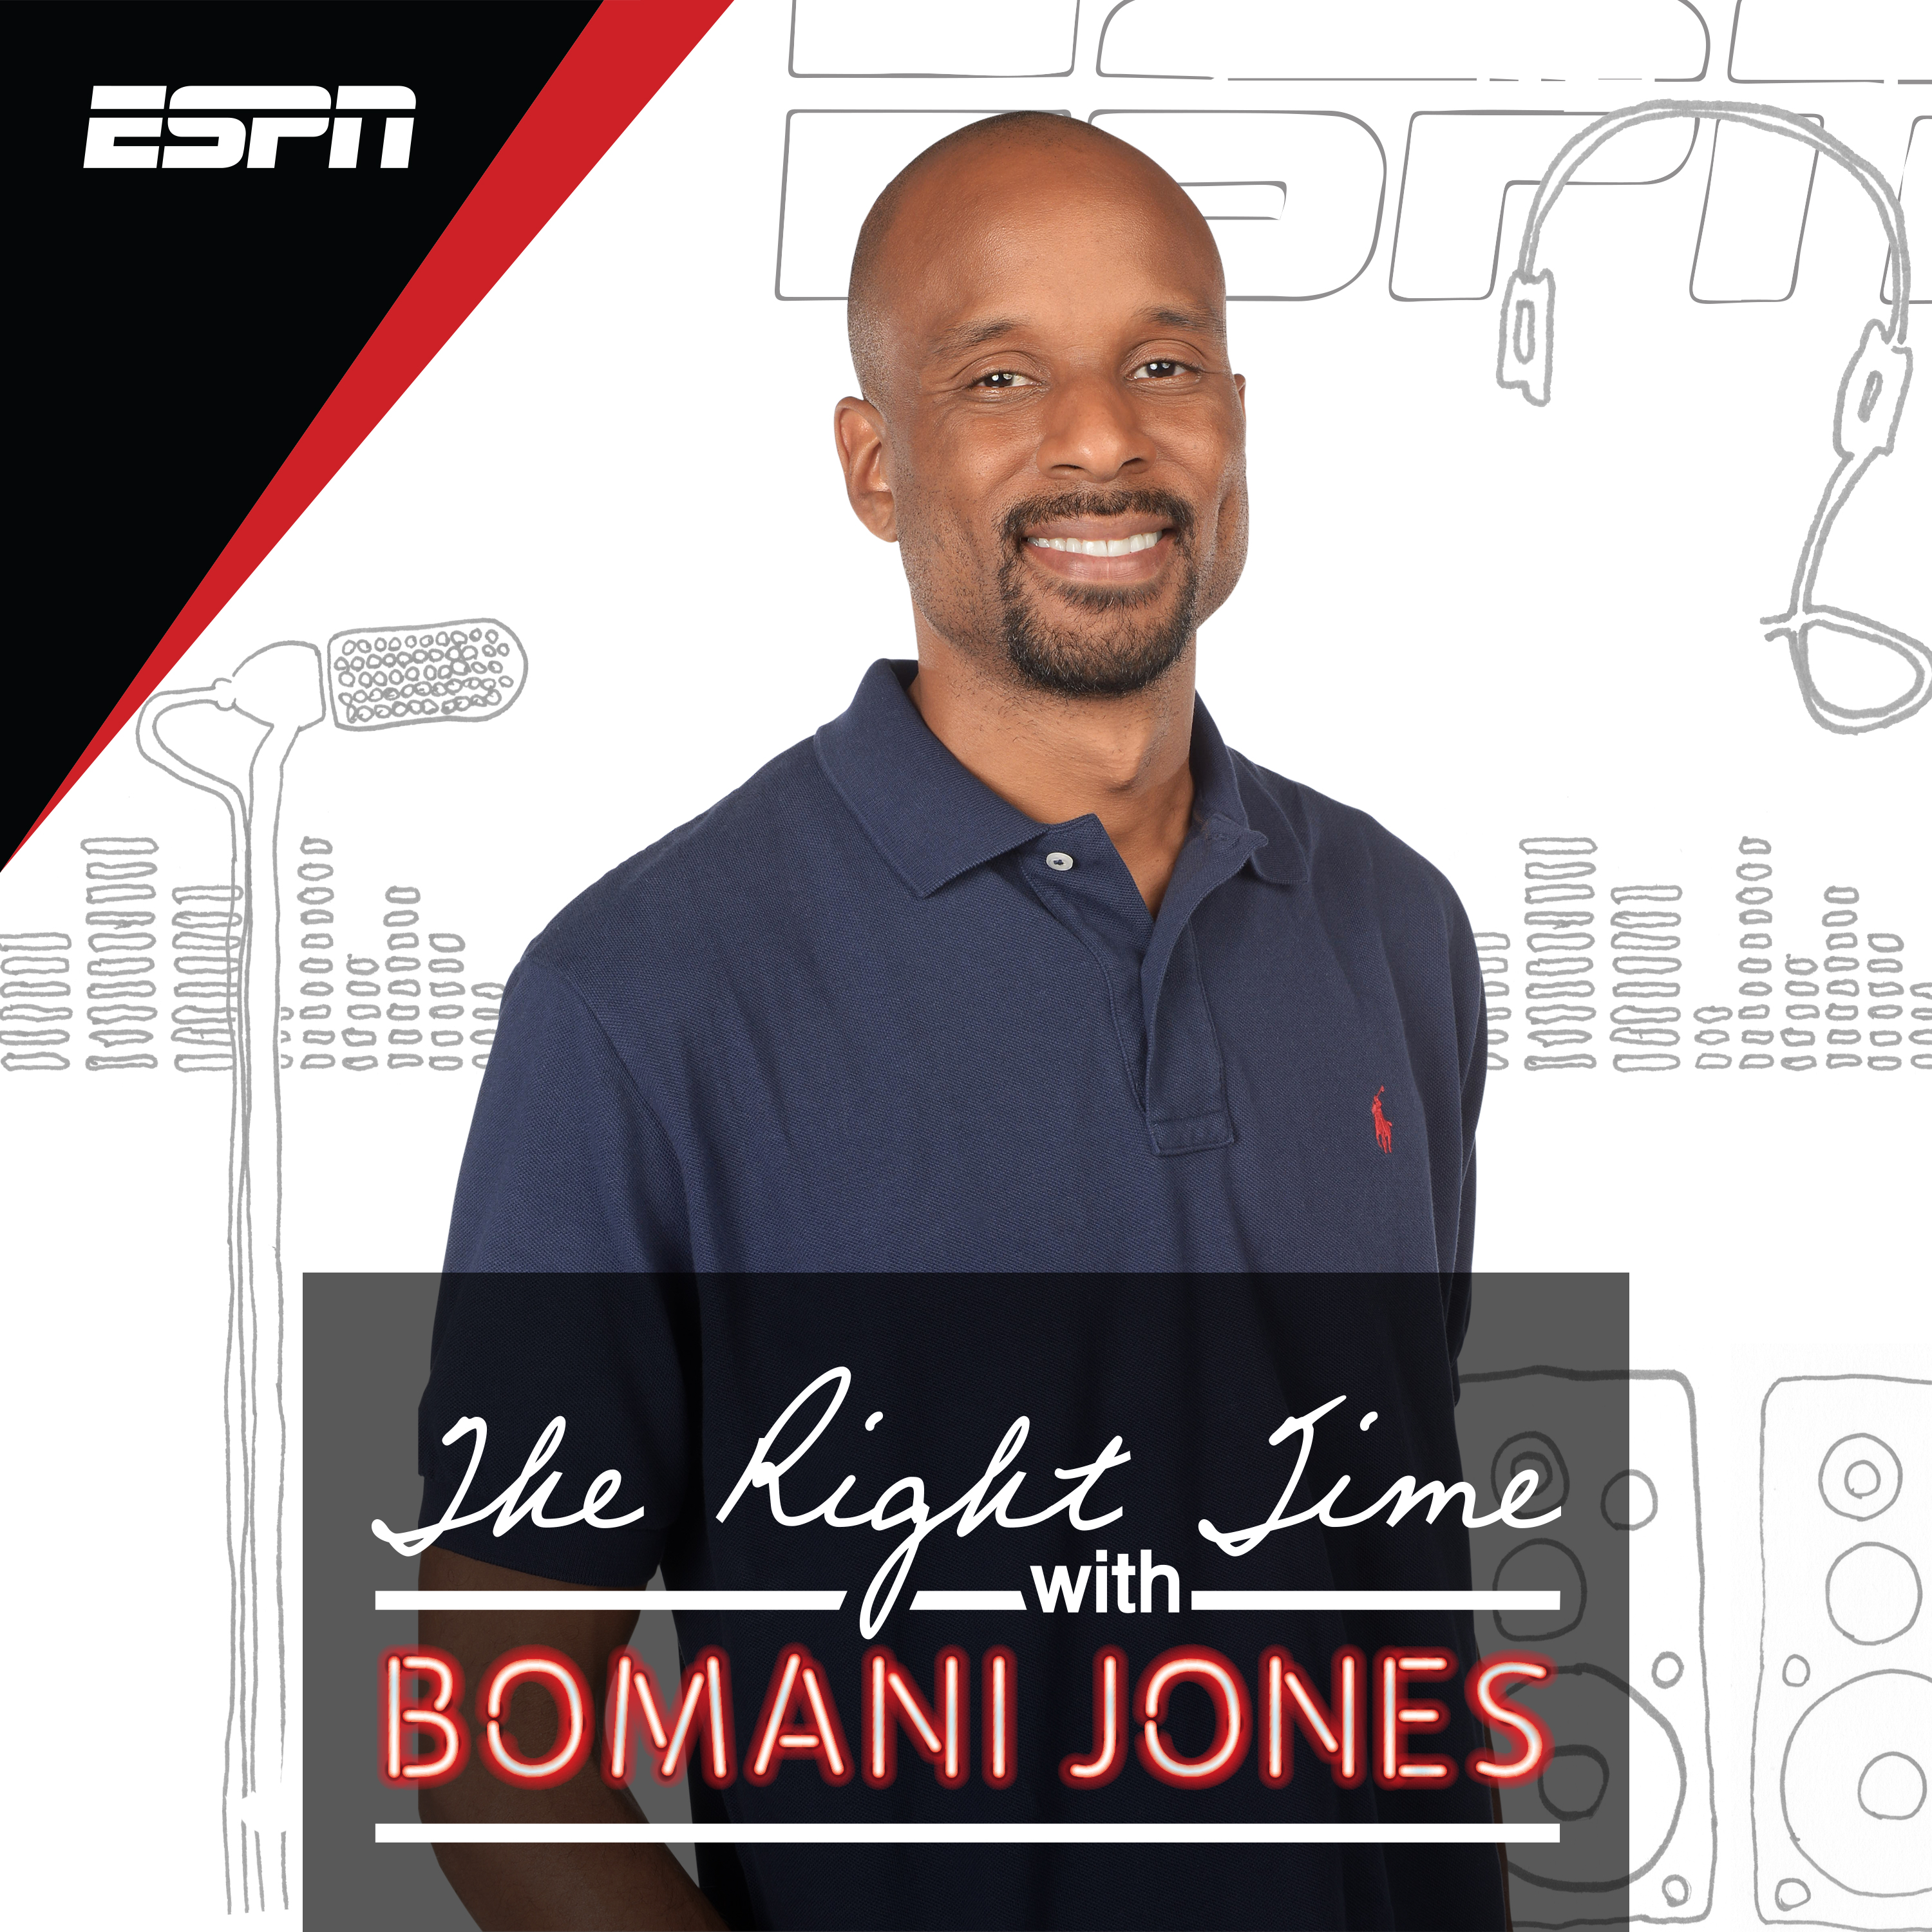 The Right Time with Bomani Jones | Podbay3000 x 3000